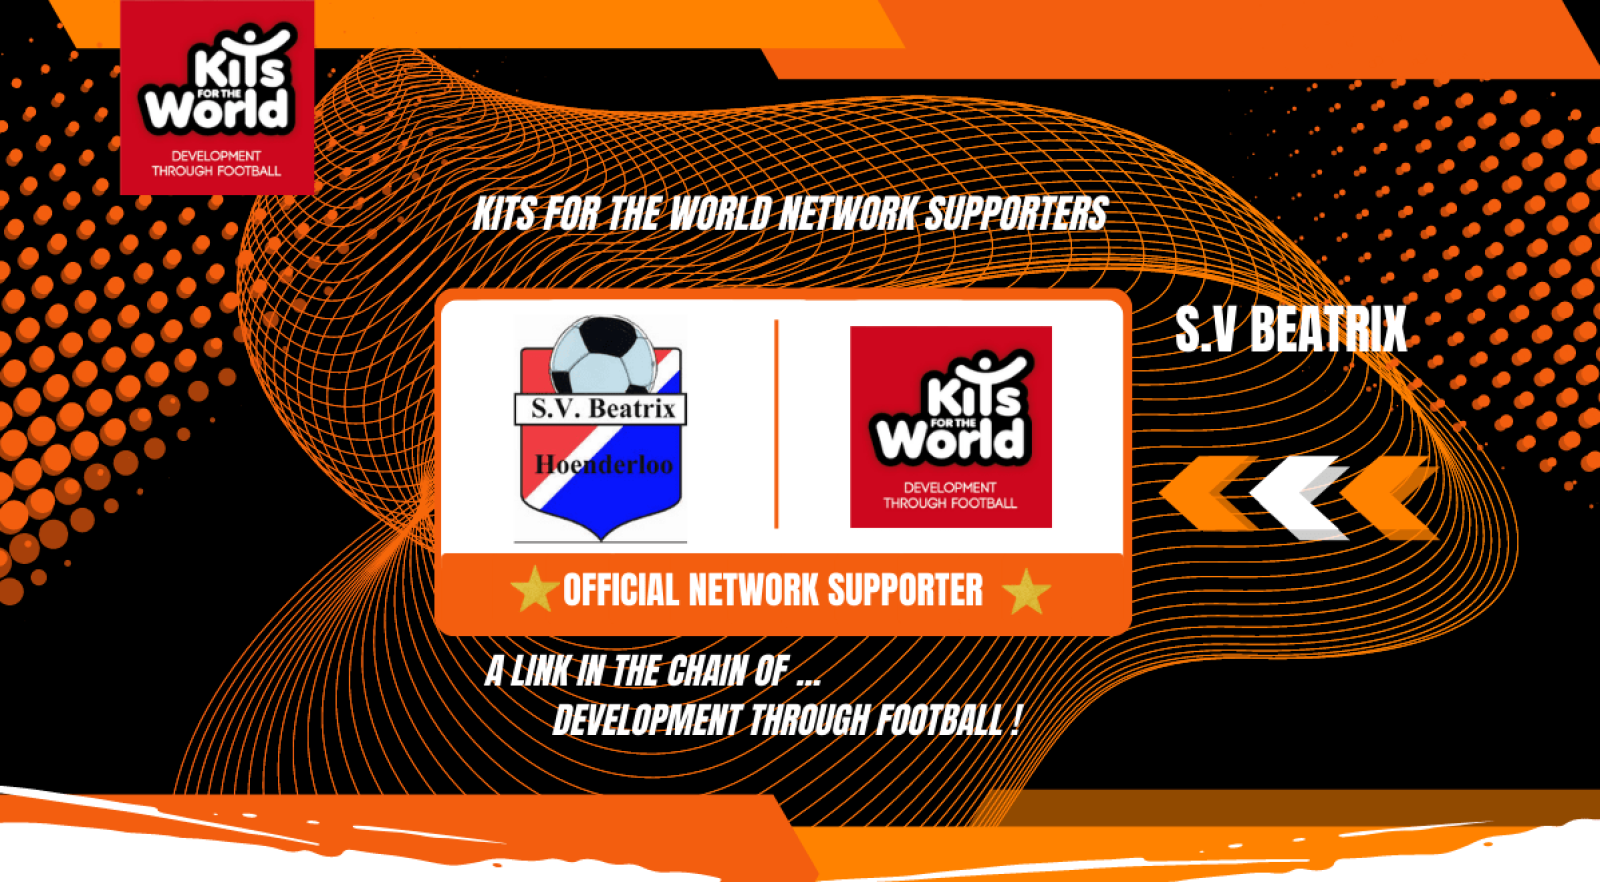 S.V BEATRIX_official NETWORK SUPPORTER _Kits for the World